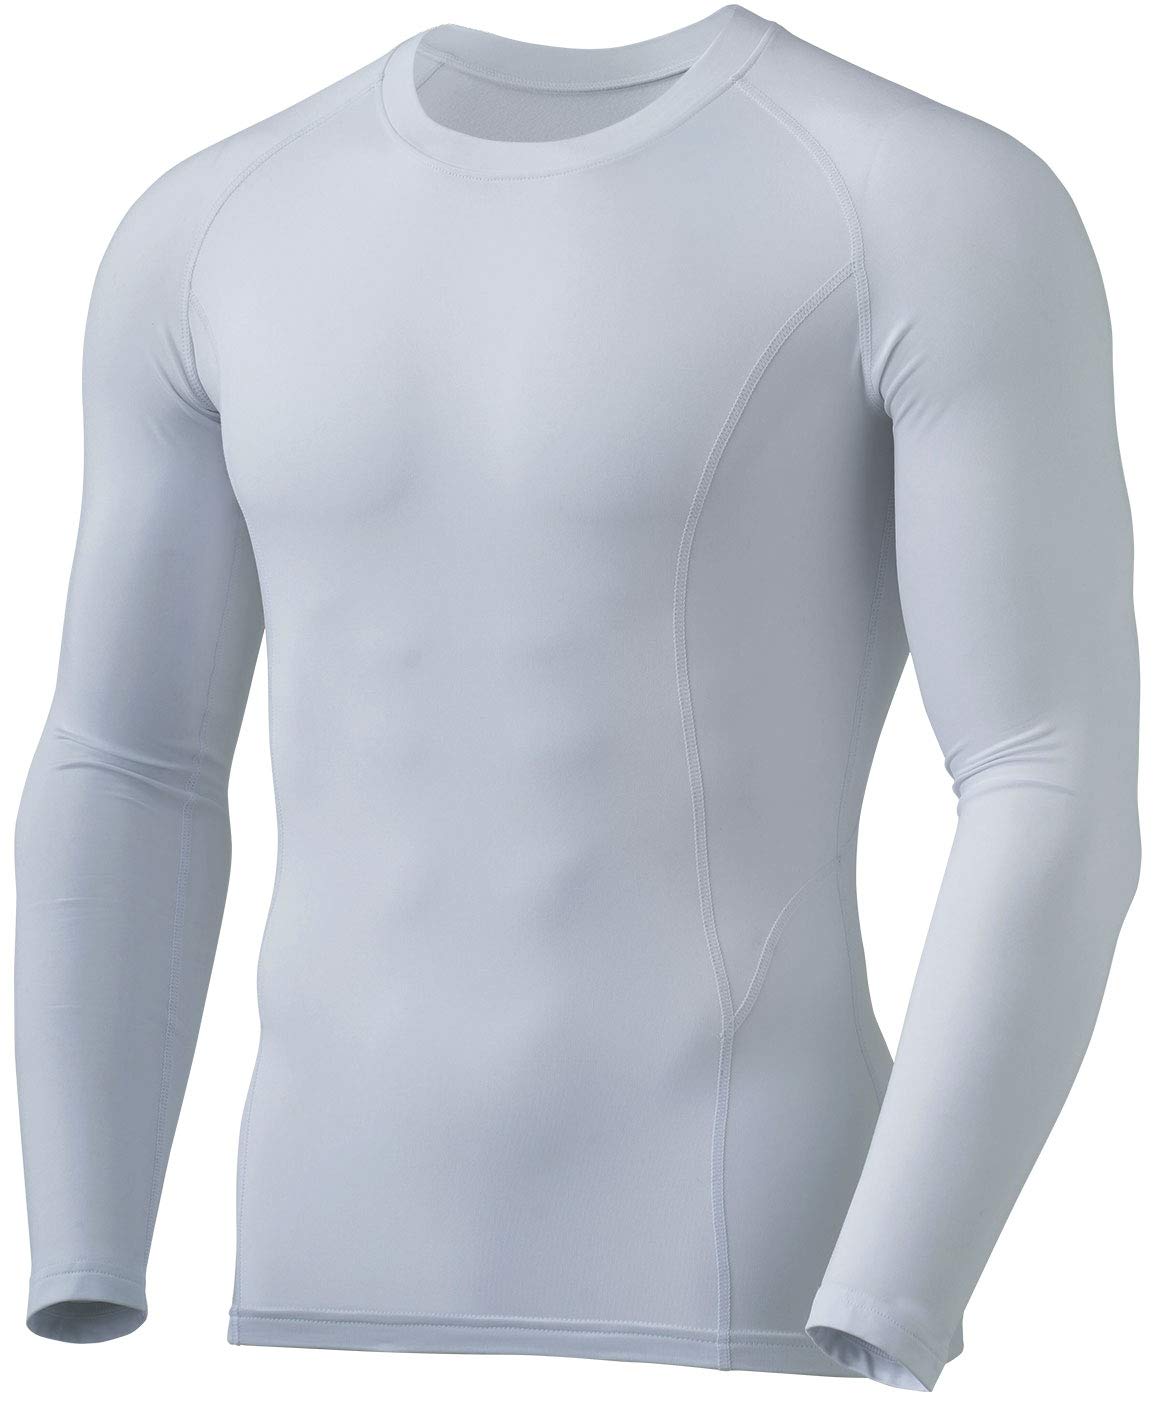 TSLA Mens Thermal Long Sleeve compression Shirts, Athletic Base Layer Top,  Winter gear Running T-Shirt, Heatlock Round Neck White, X-Large Walmart  Canada